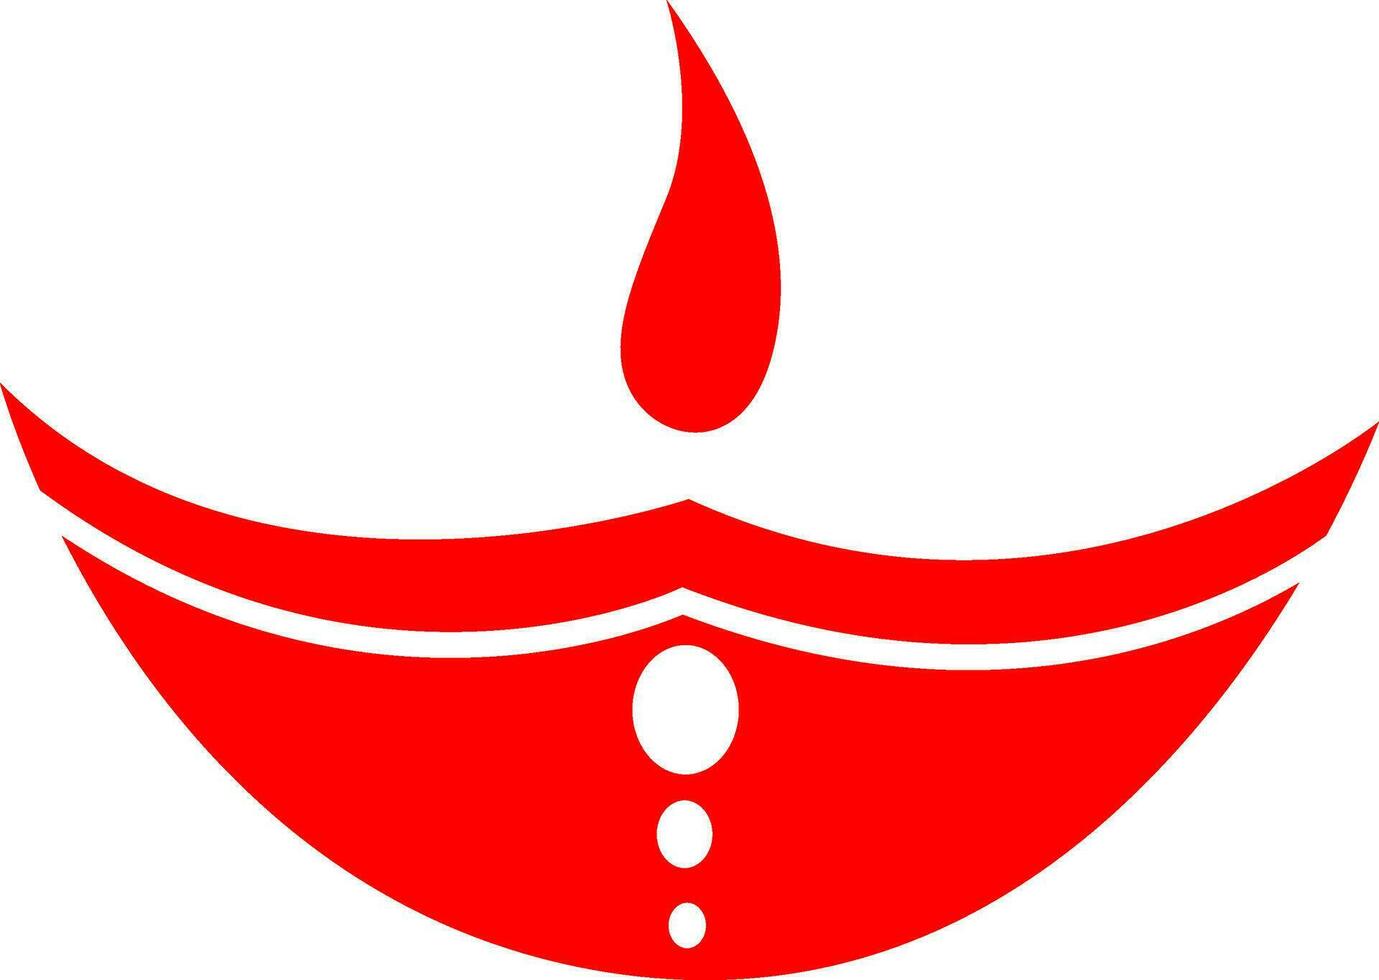 Diya red and white color. vector